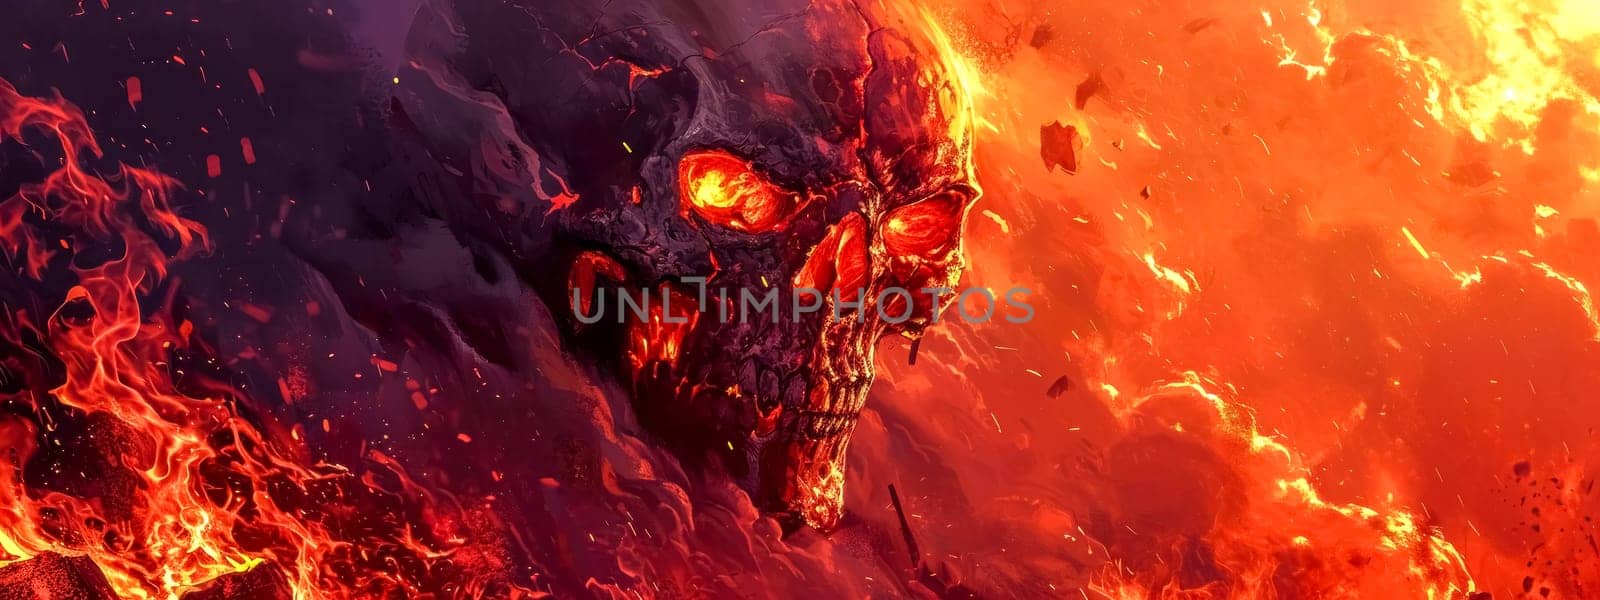 The image depicts a fiery, demonic skull submerged in flames, with a menacing gaze and a molten texture, suitable for horror or fantasy-themed content. banner with copy space